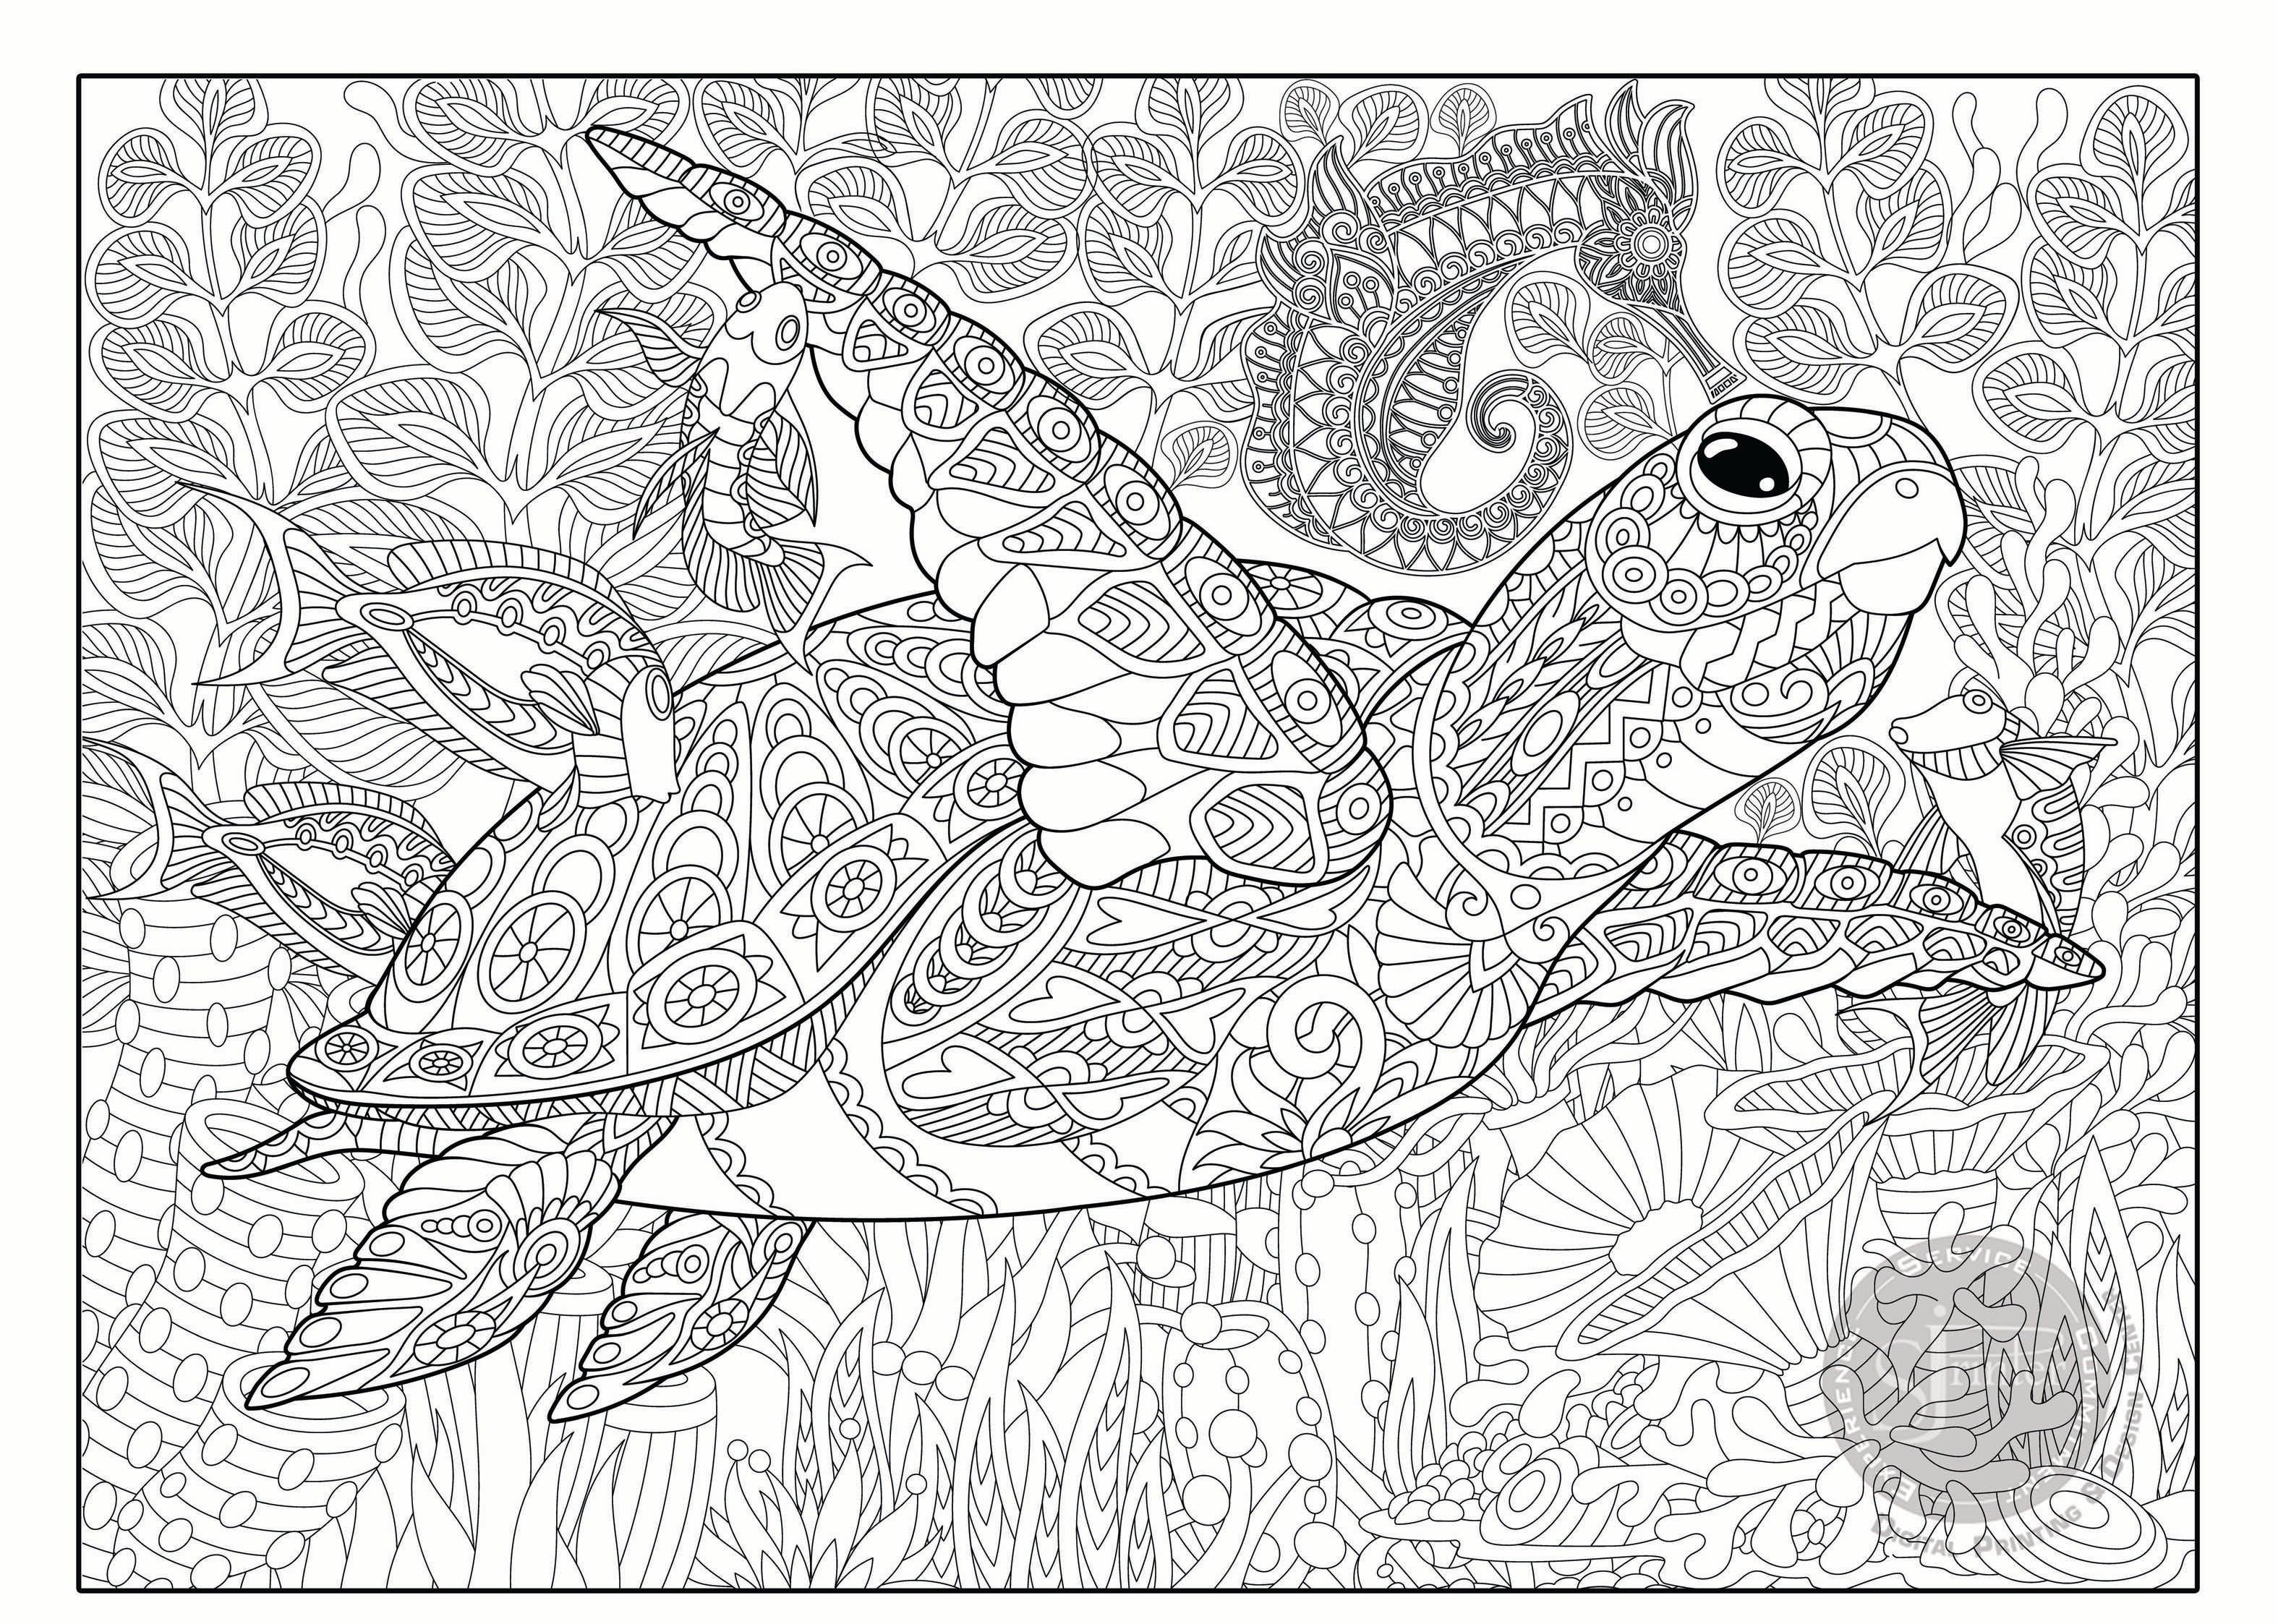 Buy superb sea turtle coloring posters from sjprinter store